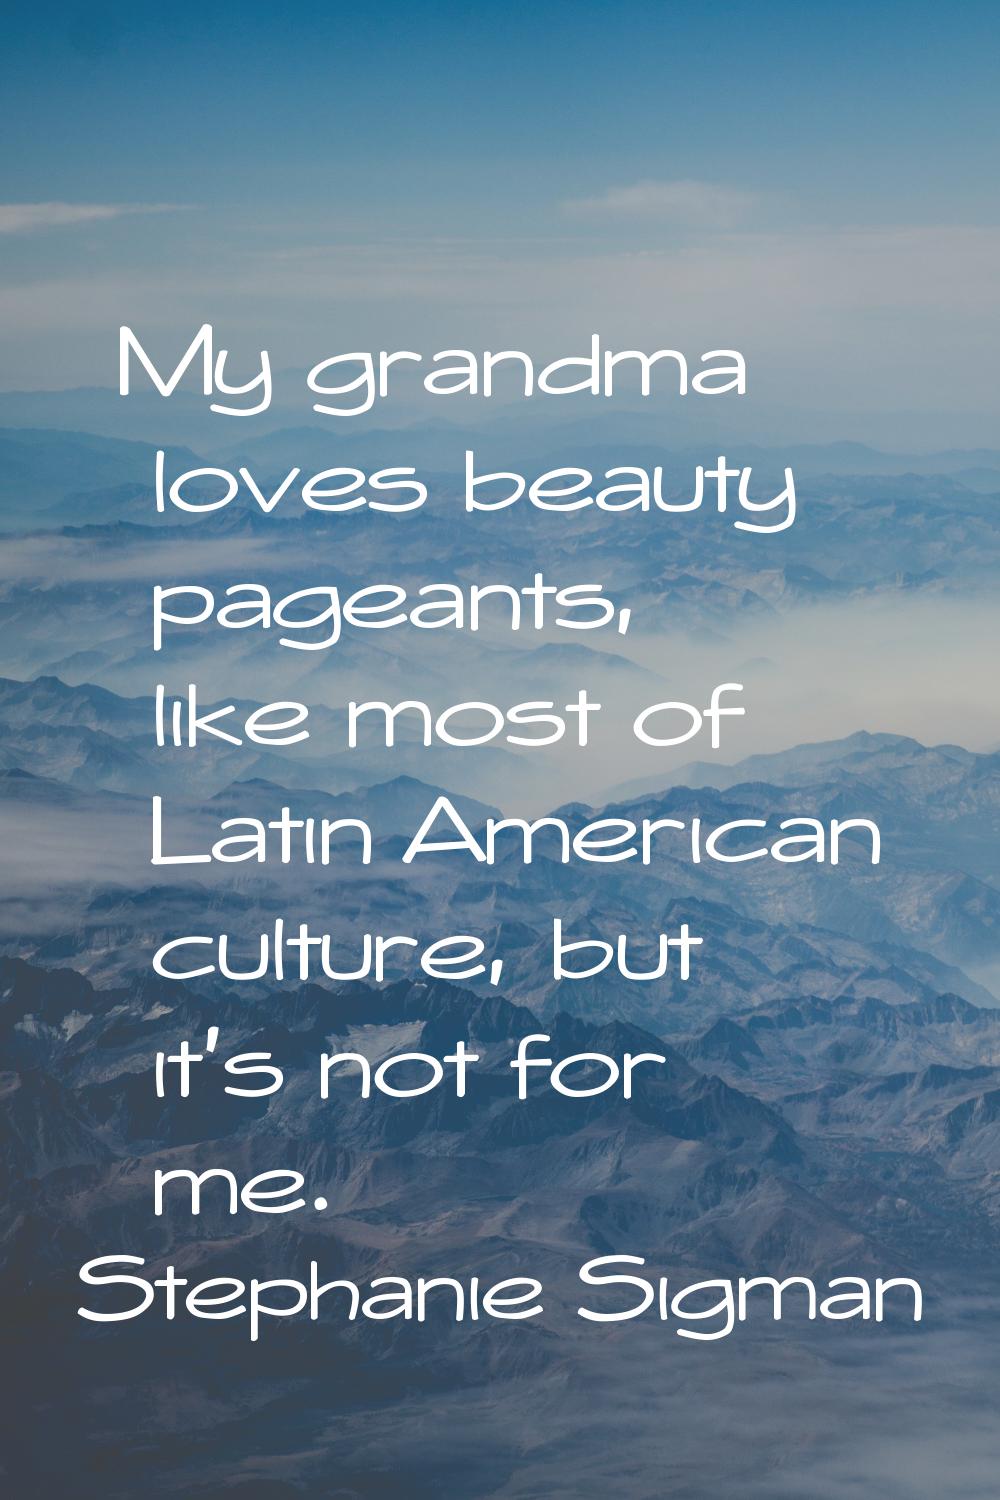 My grandma loves beauty pageants, like most of Latin American culture, but it's not for me.